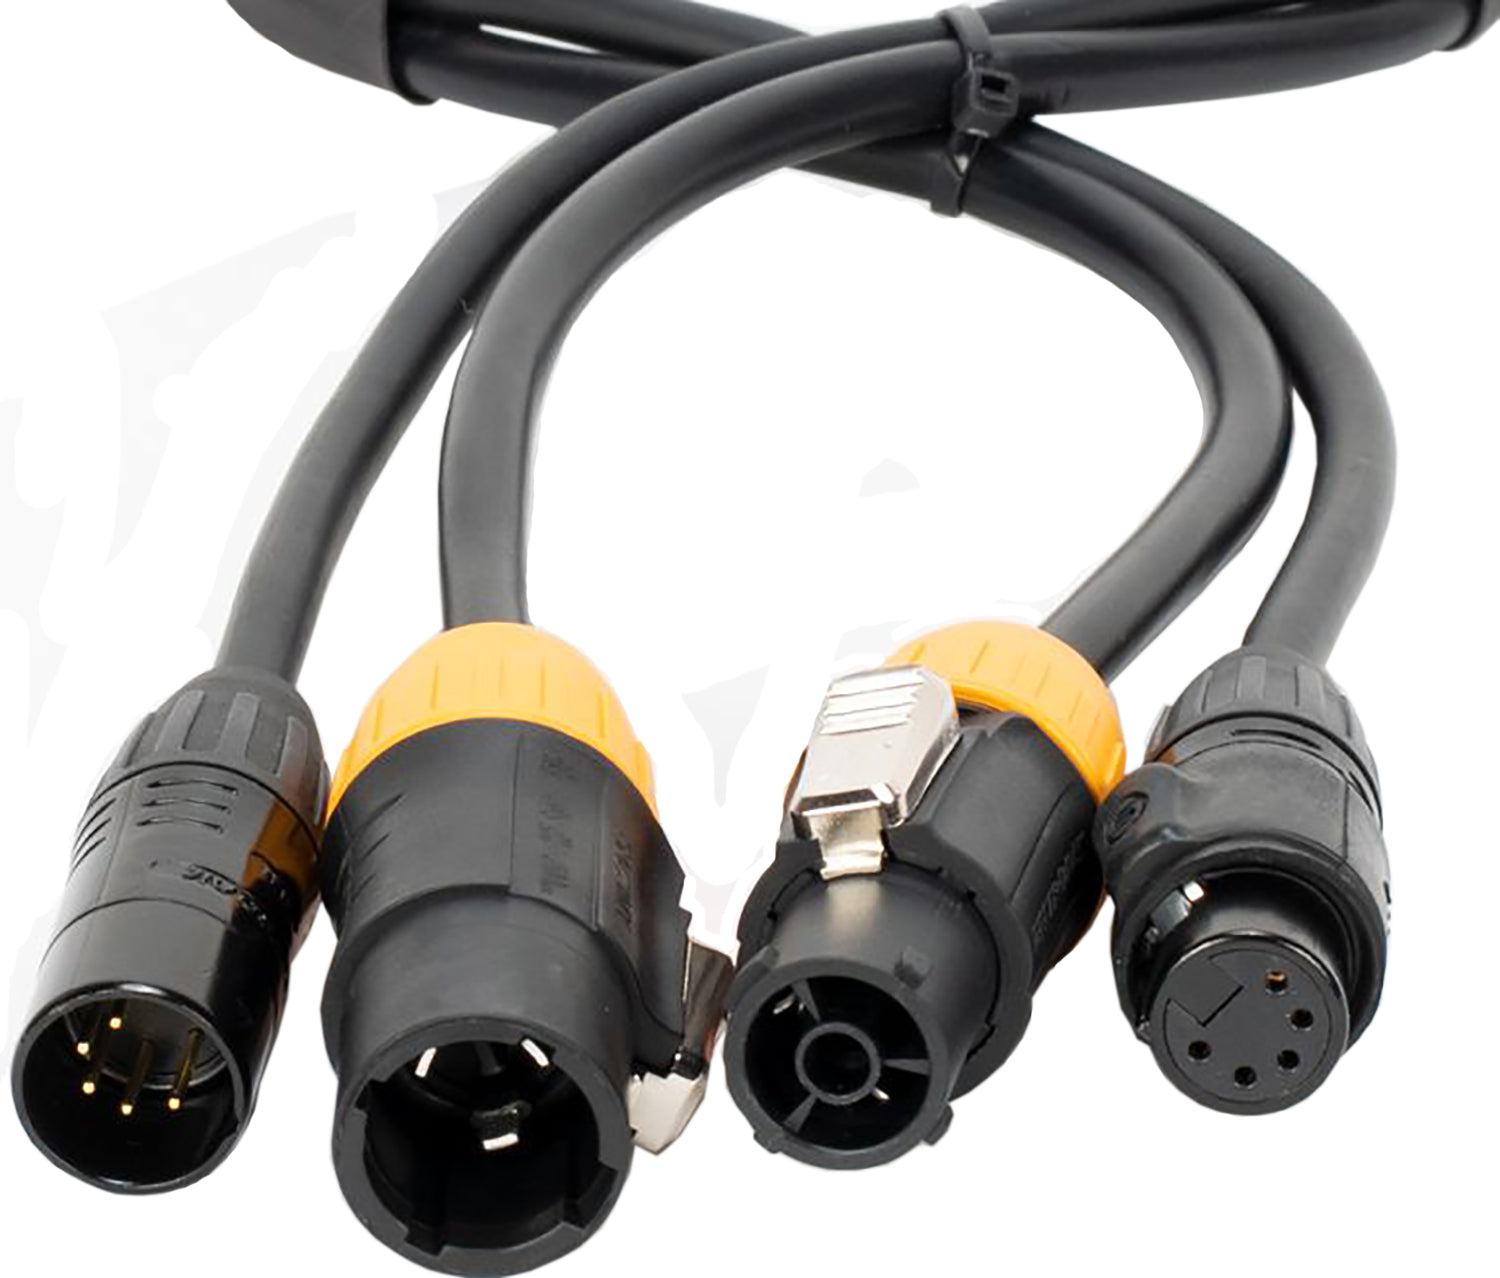 Accu-Cable AC5PTRUE12 12-Foot 5-Pin XLR IP65 Water Resistant DMX Cable - PSSL ProSound and Stage Lighting